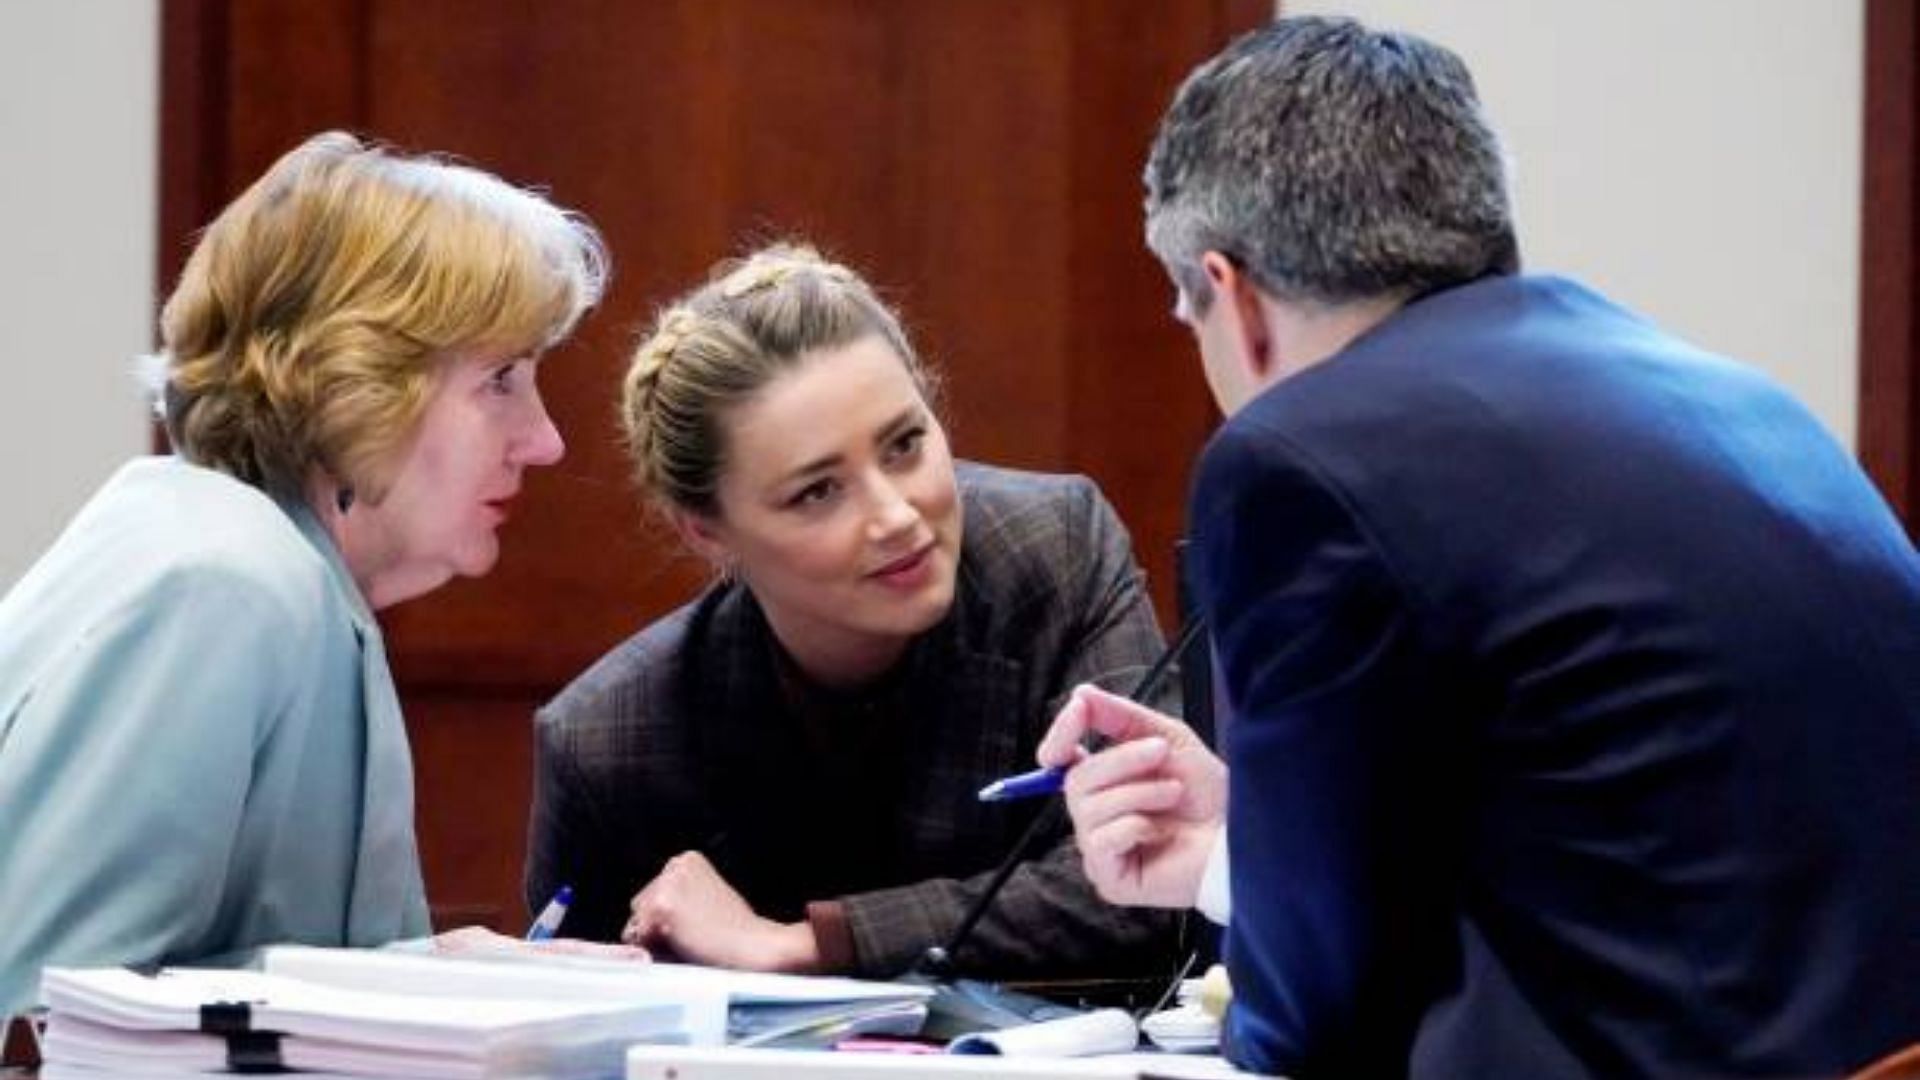 Amber Heard discussing matter with her legal team during the ongoing defamation trial (Image via Steve Helber/Getty Images)